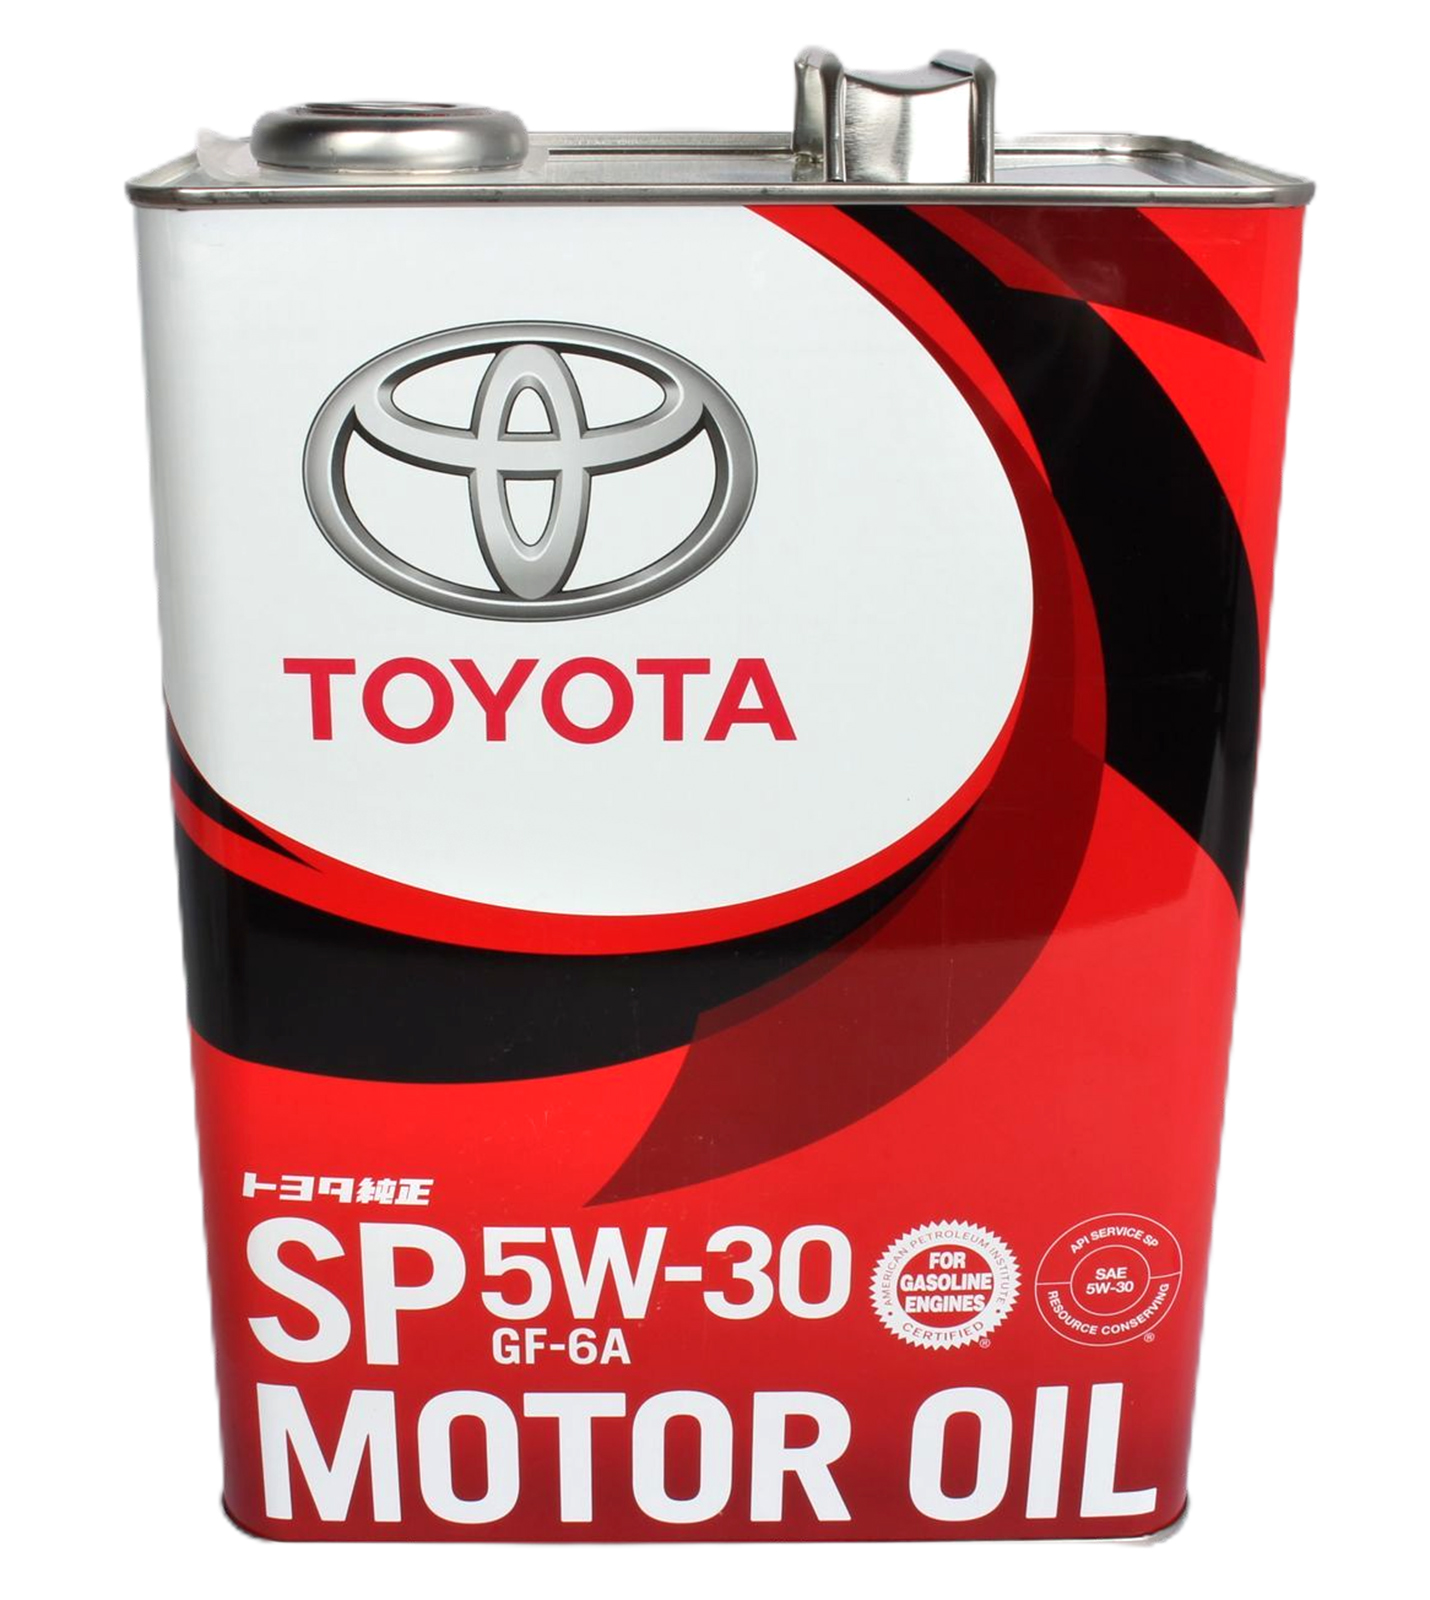 TOYOTA Масло моторное 5W-30 MOTOR OIL SP 4L